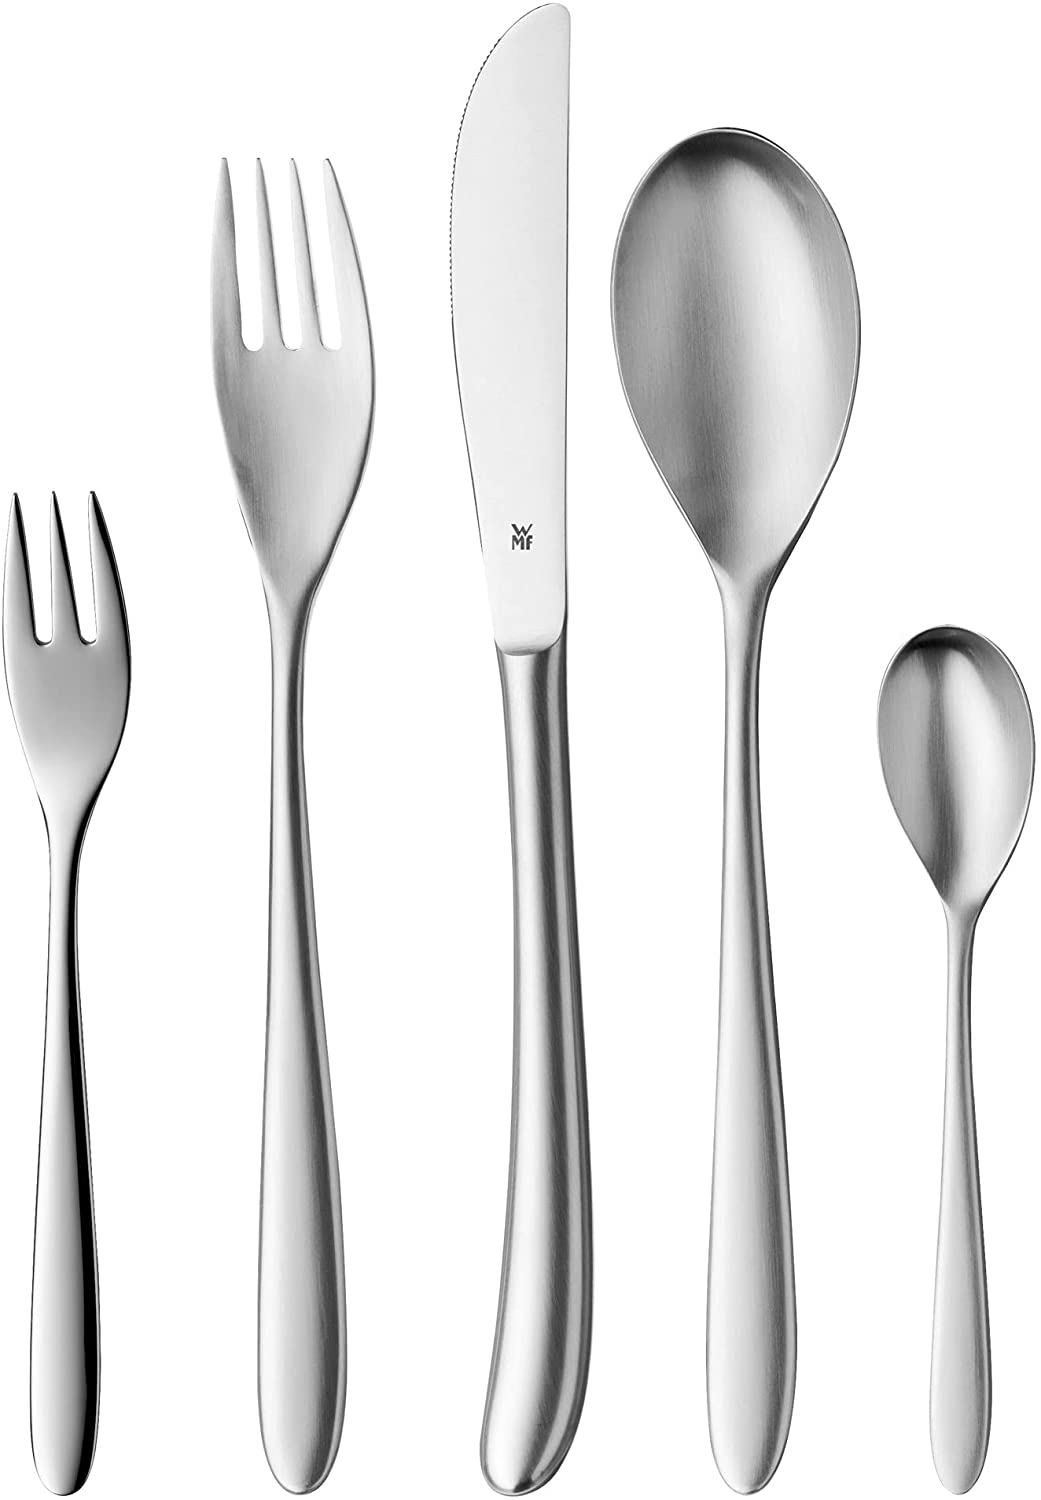 WMF Silk Cutlery Set for 12 People, Cutlery 60 Pieces, Monobloc Knife, Matte Cromargan Stainless Steel, Dishwasher Safe